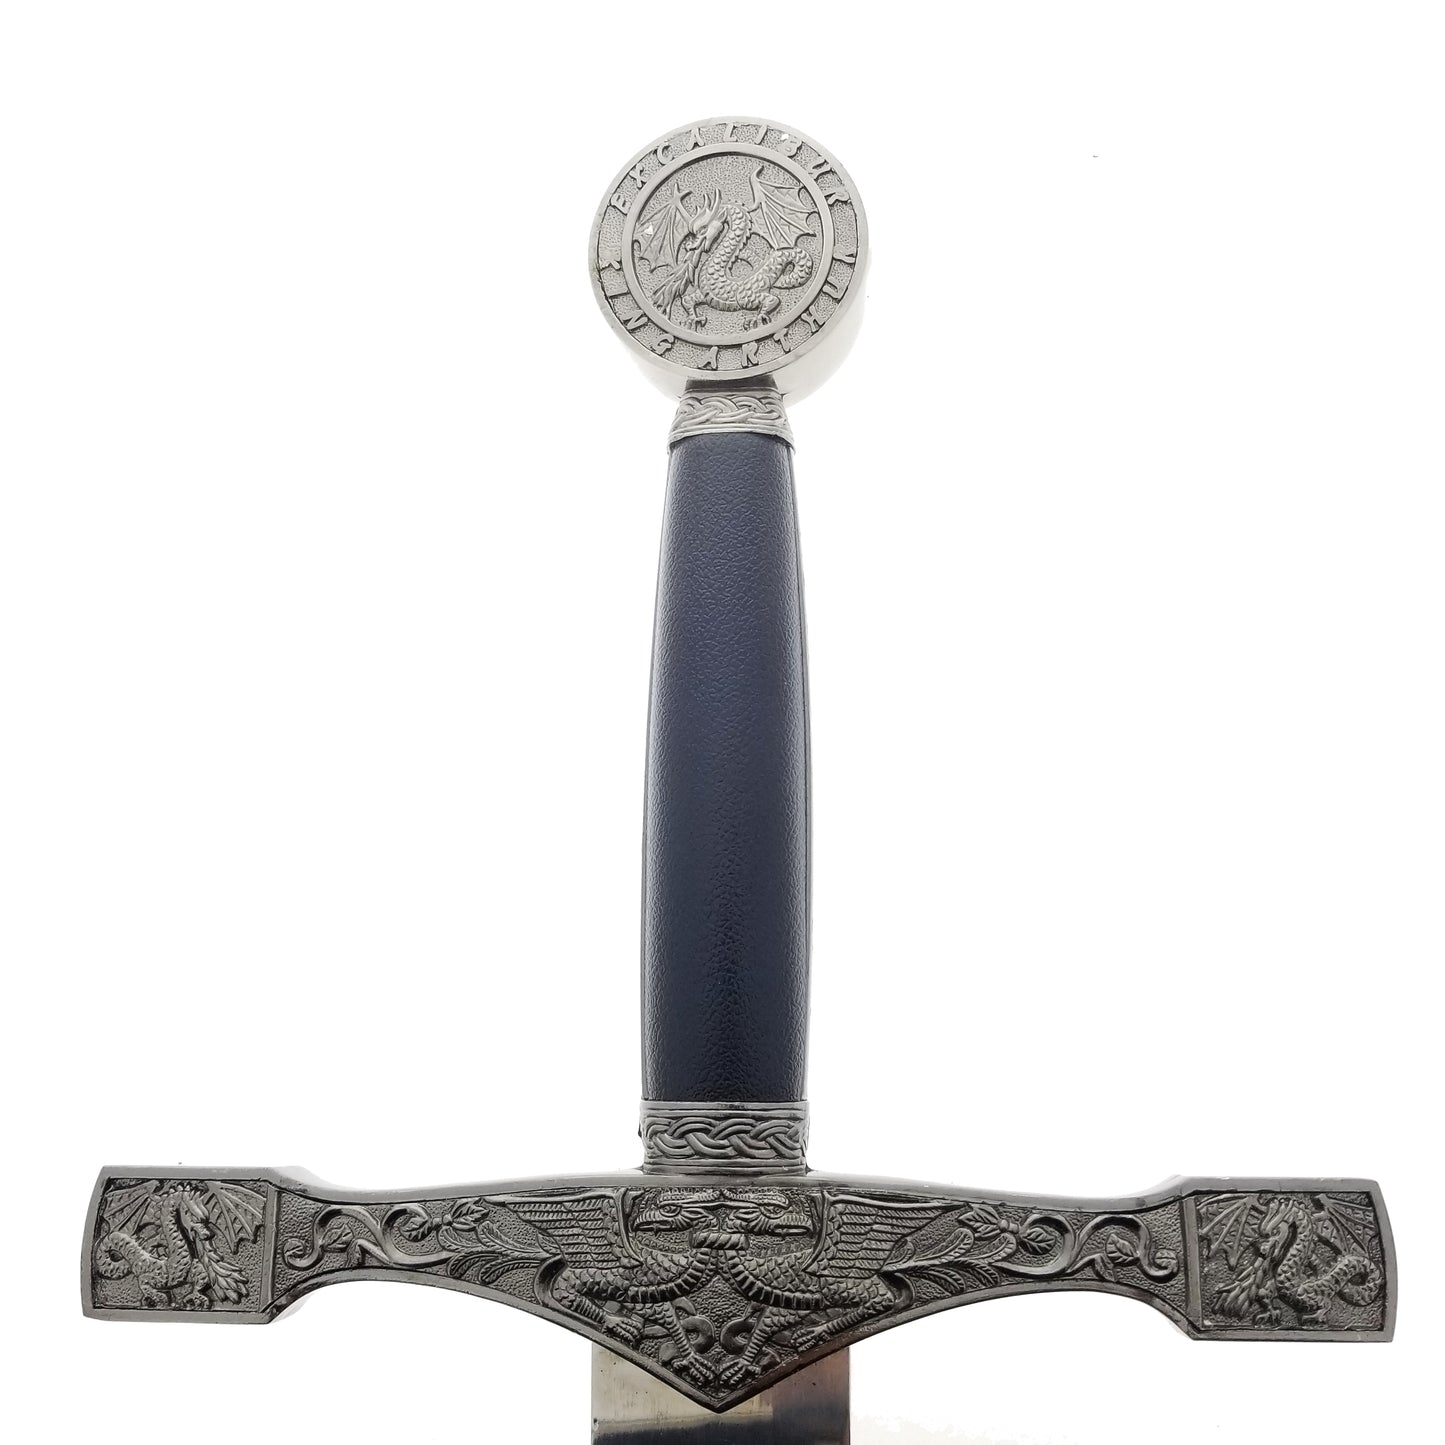 45" Excalibur Sword Knight Collection